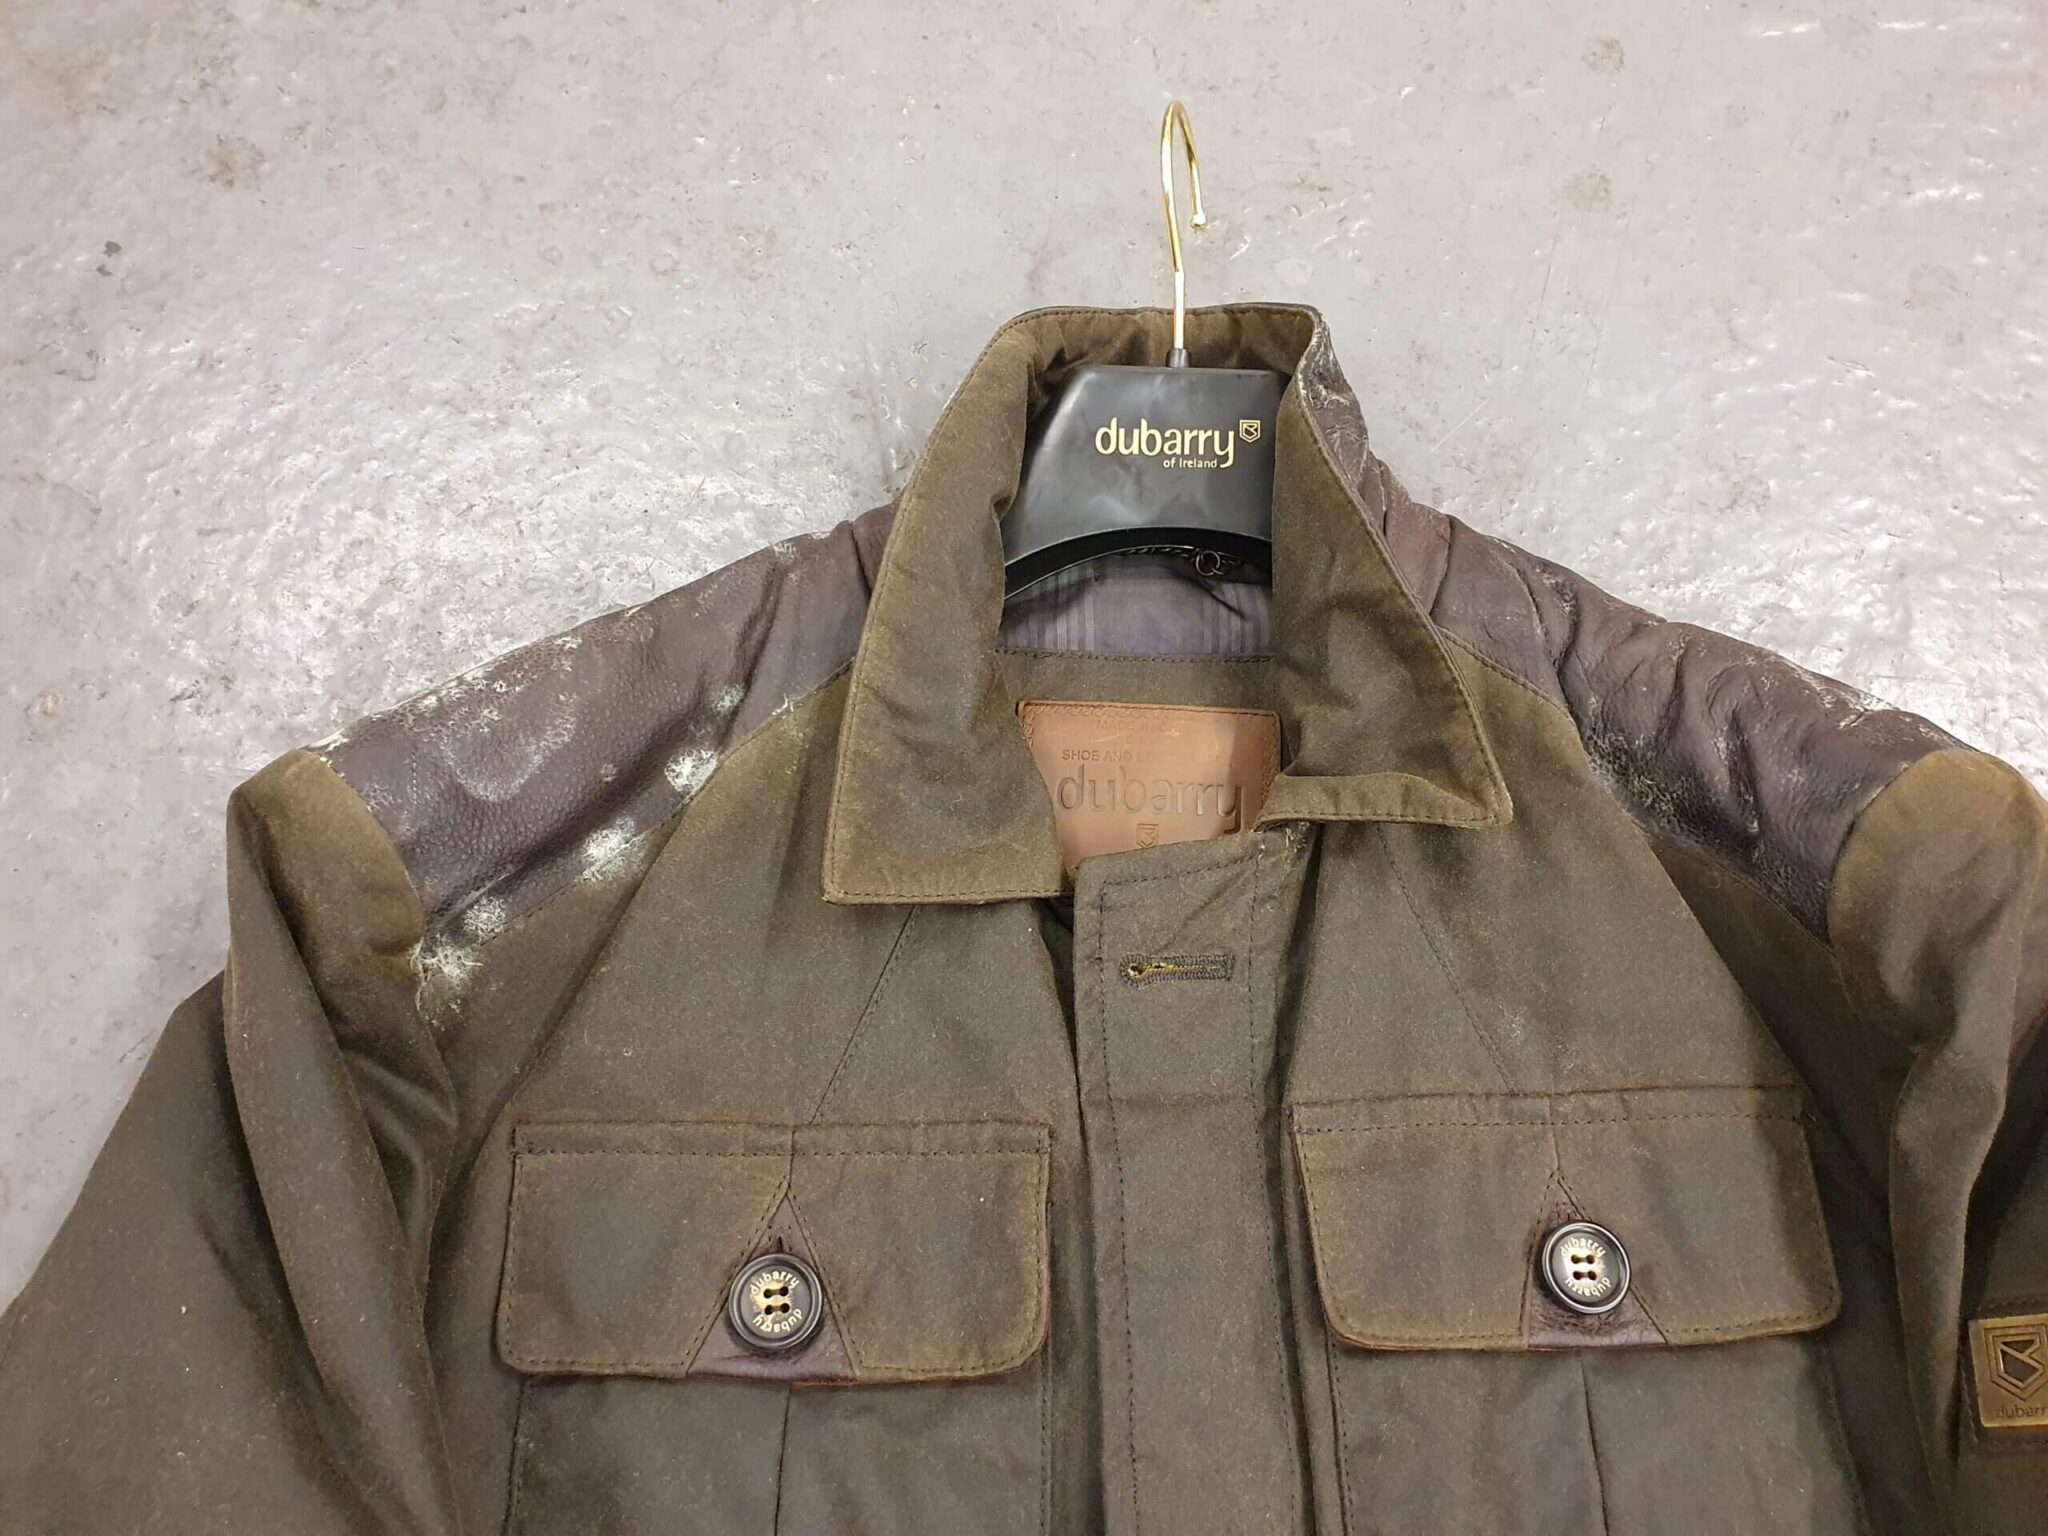 Remarkable Wax Jacket Repairs & Alterations | Wax Jackets Cleaned